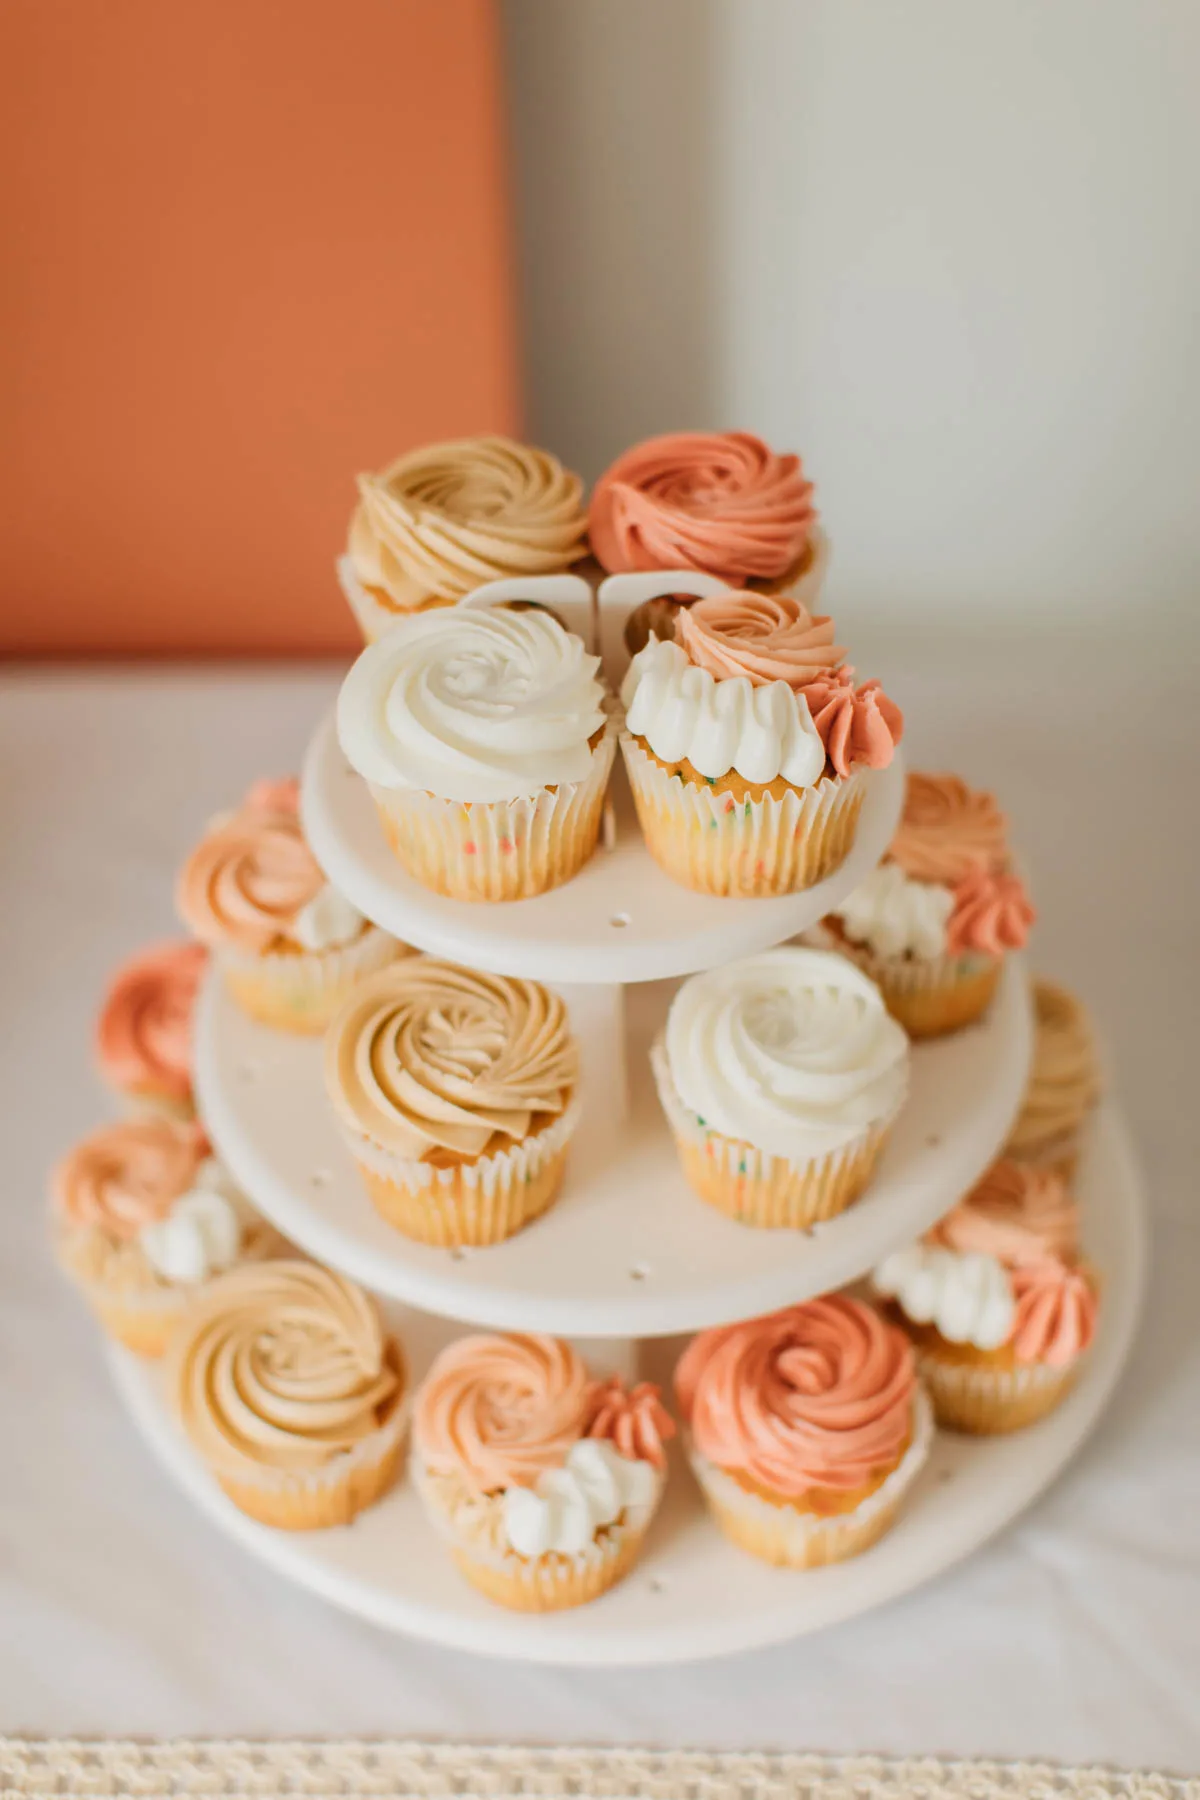 Cupcakes with pink, tan, and white frosting on white cupcake stand.